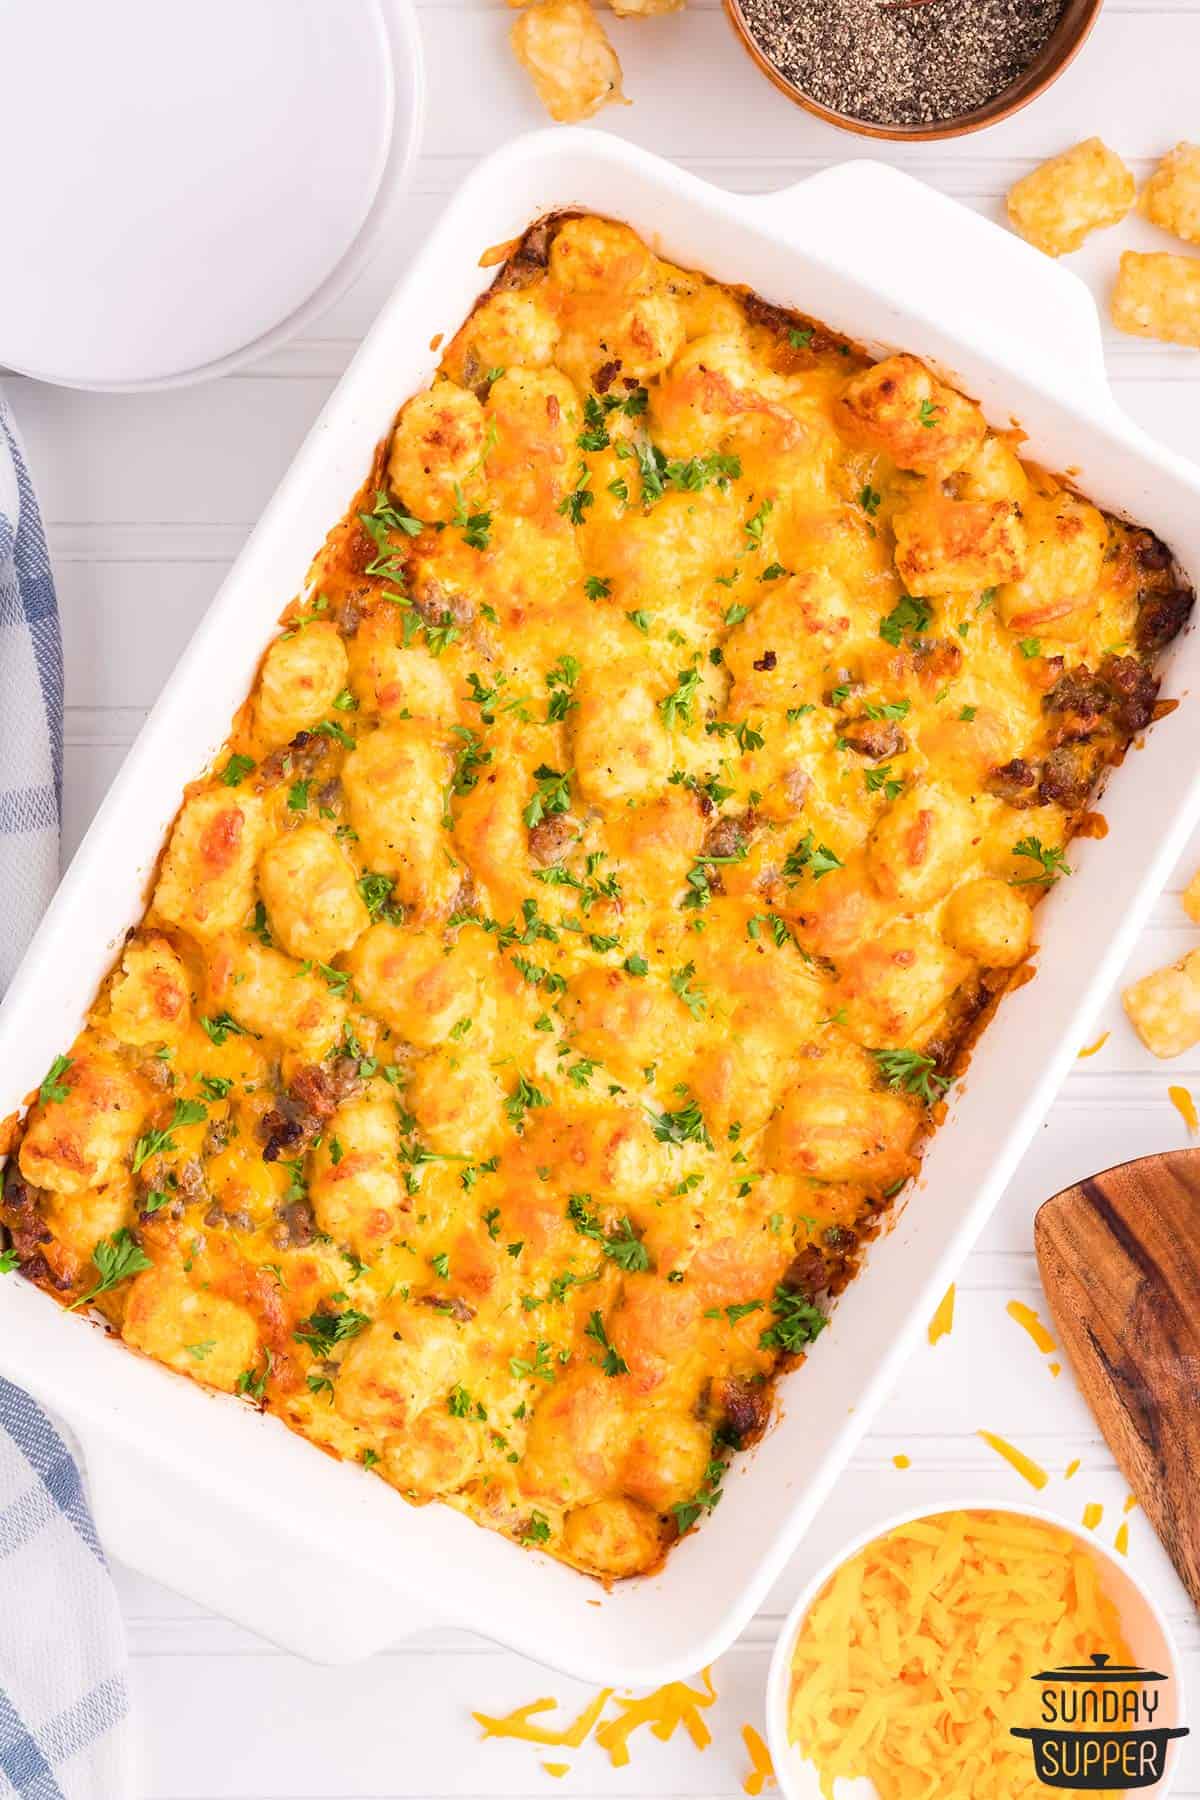 completed and baked tater tot casserole